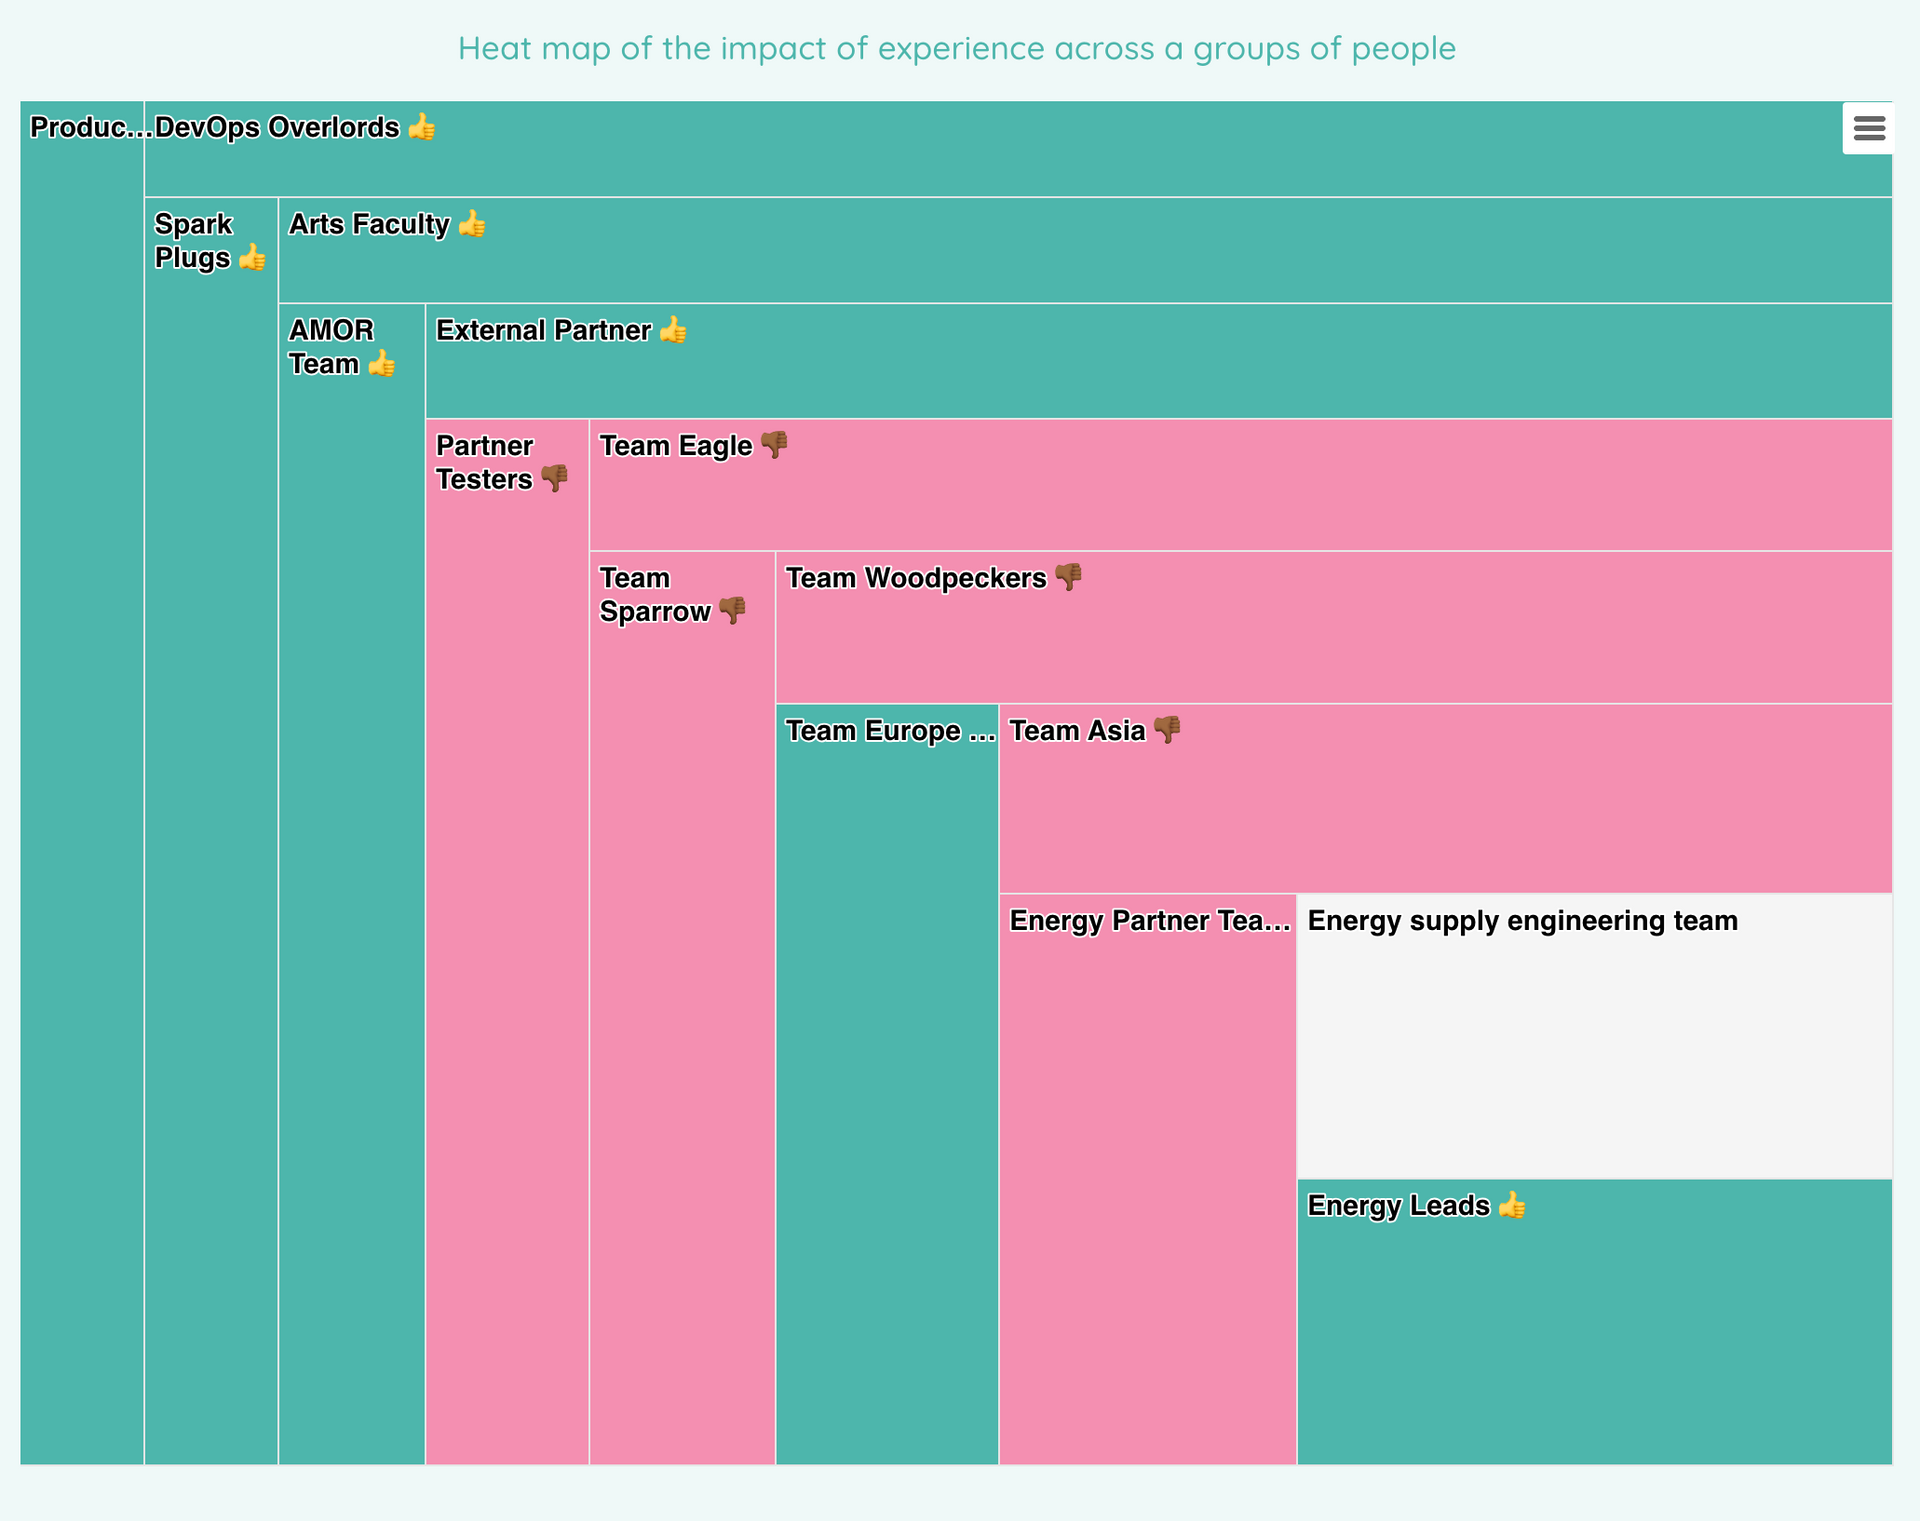 Employee experience - heatmap view by team